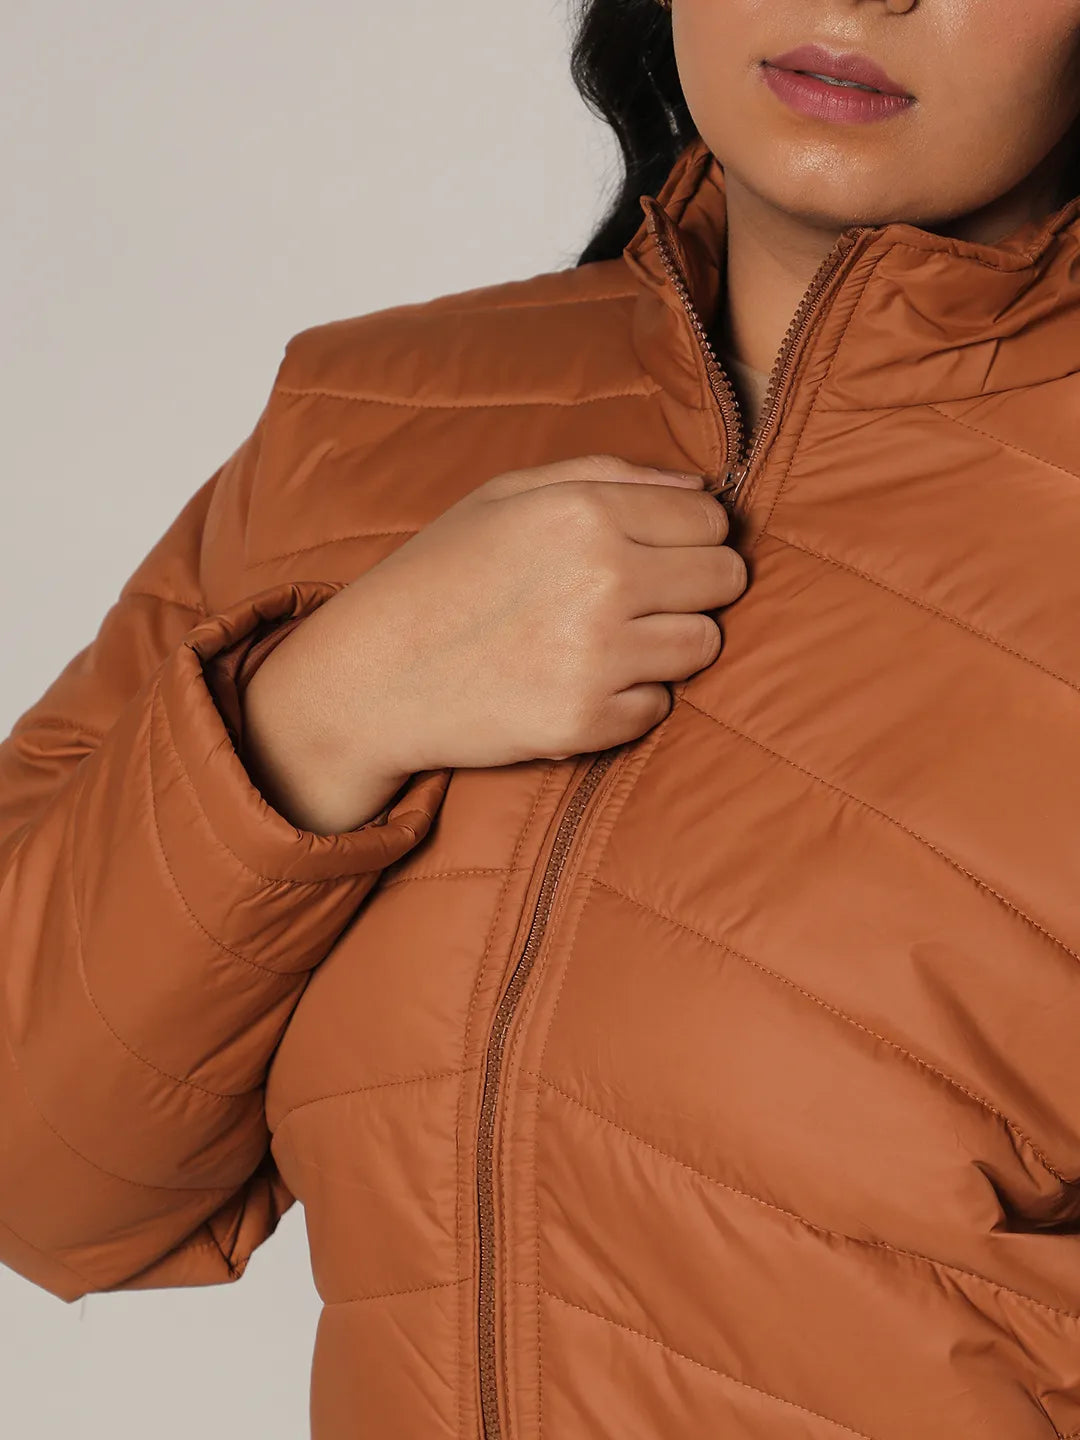 Tan Brown Quilted Puffer Jacket With Zip Closure